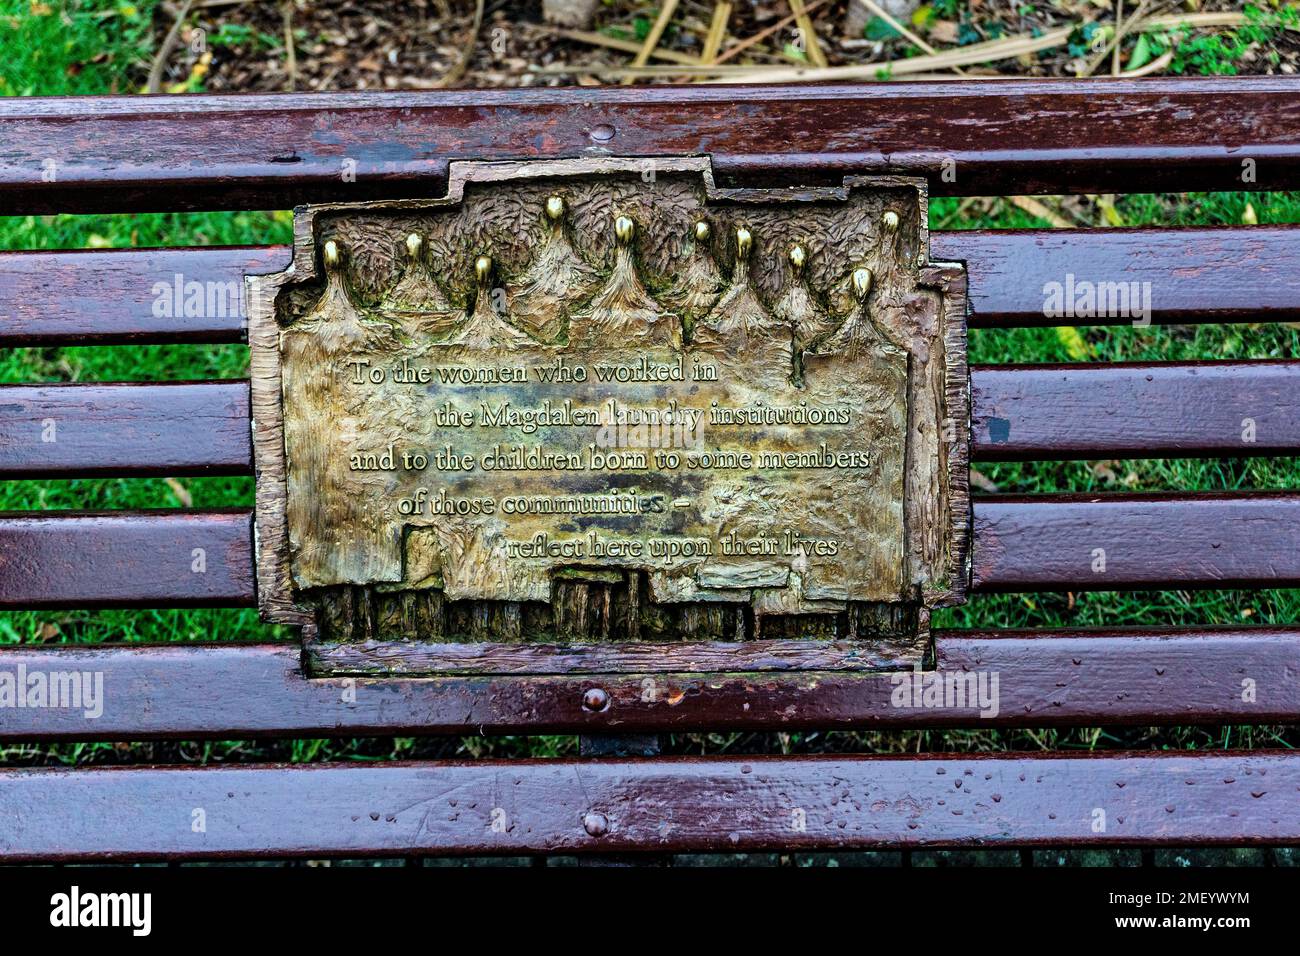 A plaque dedicated to those who worked in the Magdalen Laundry Institutions in Ireland on a bench in St Stephen’s Green. Unveiled in 1996. Stock Photo